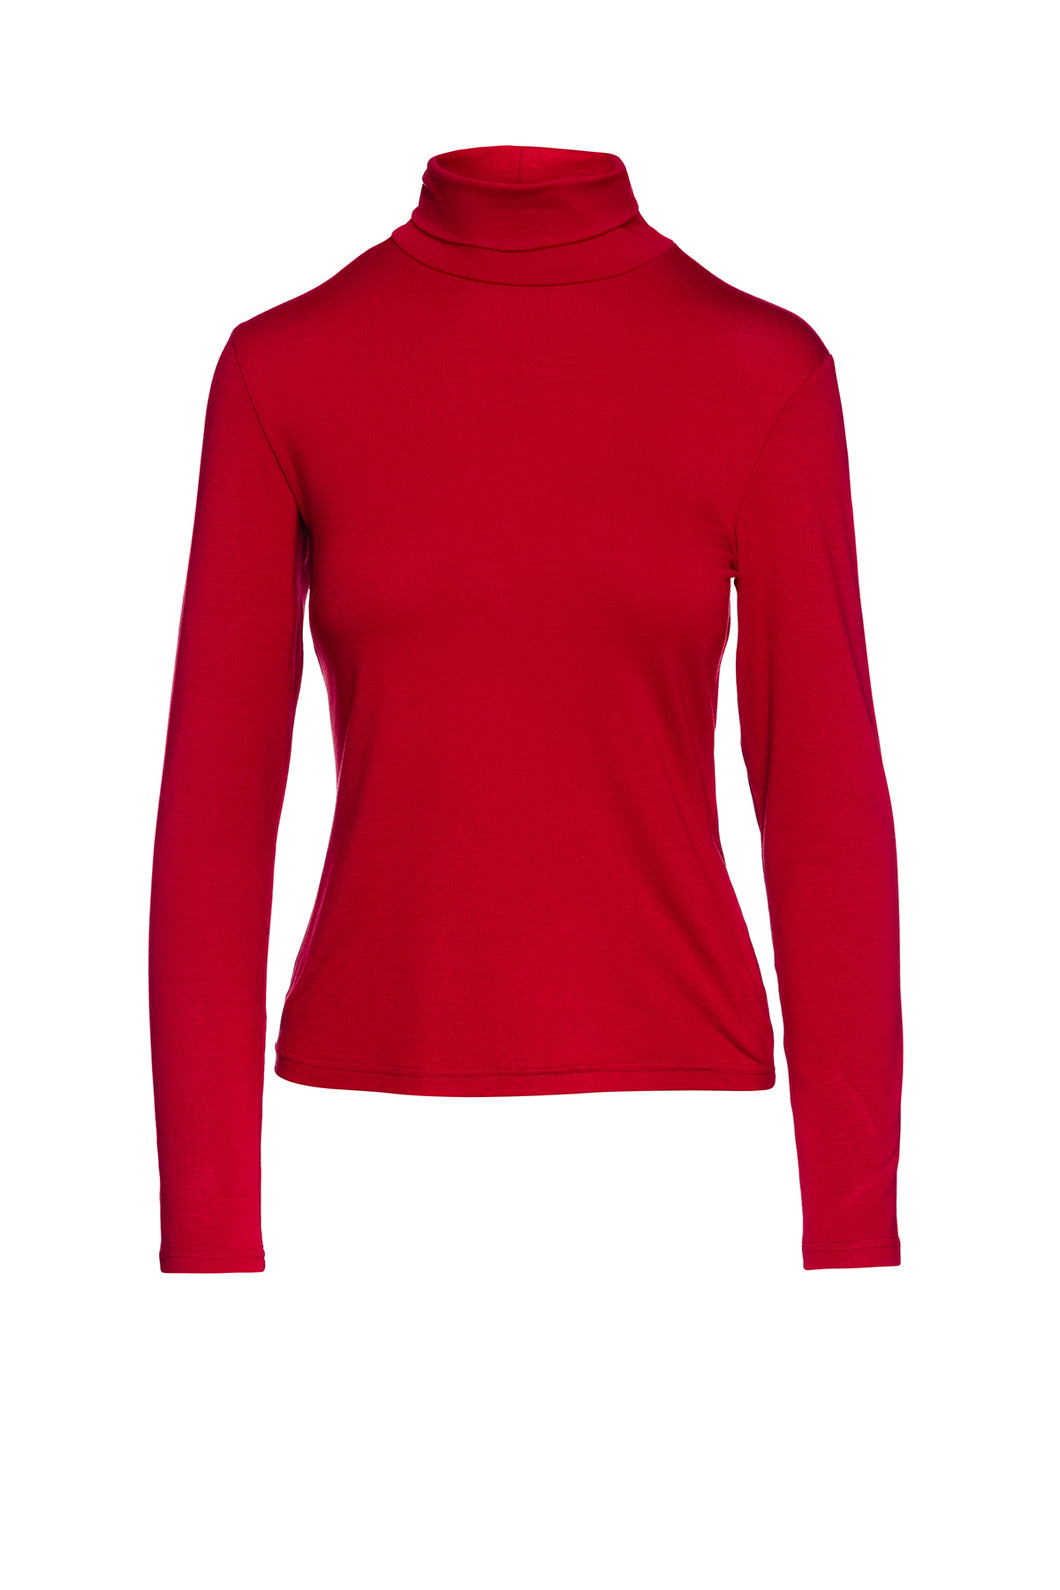 Red Turtle Neck Top By Conquista